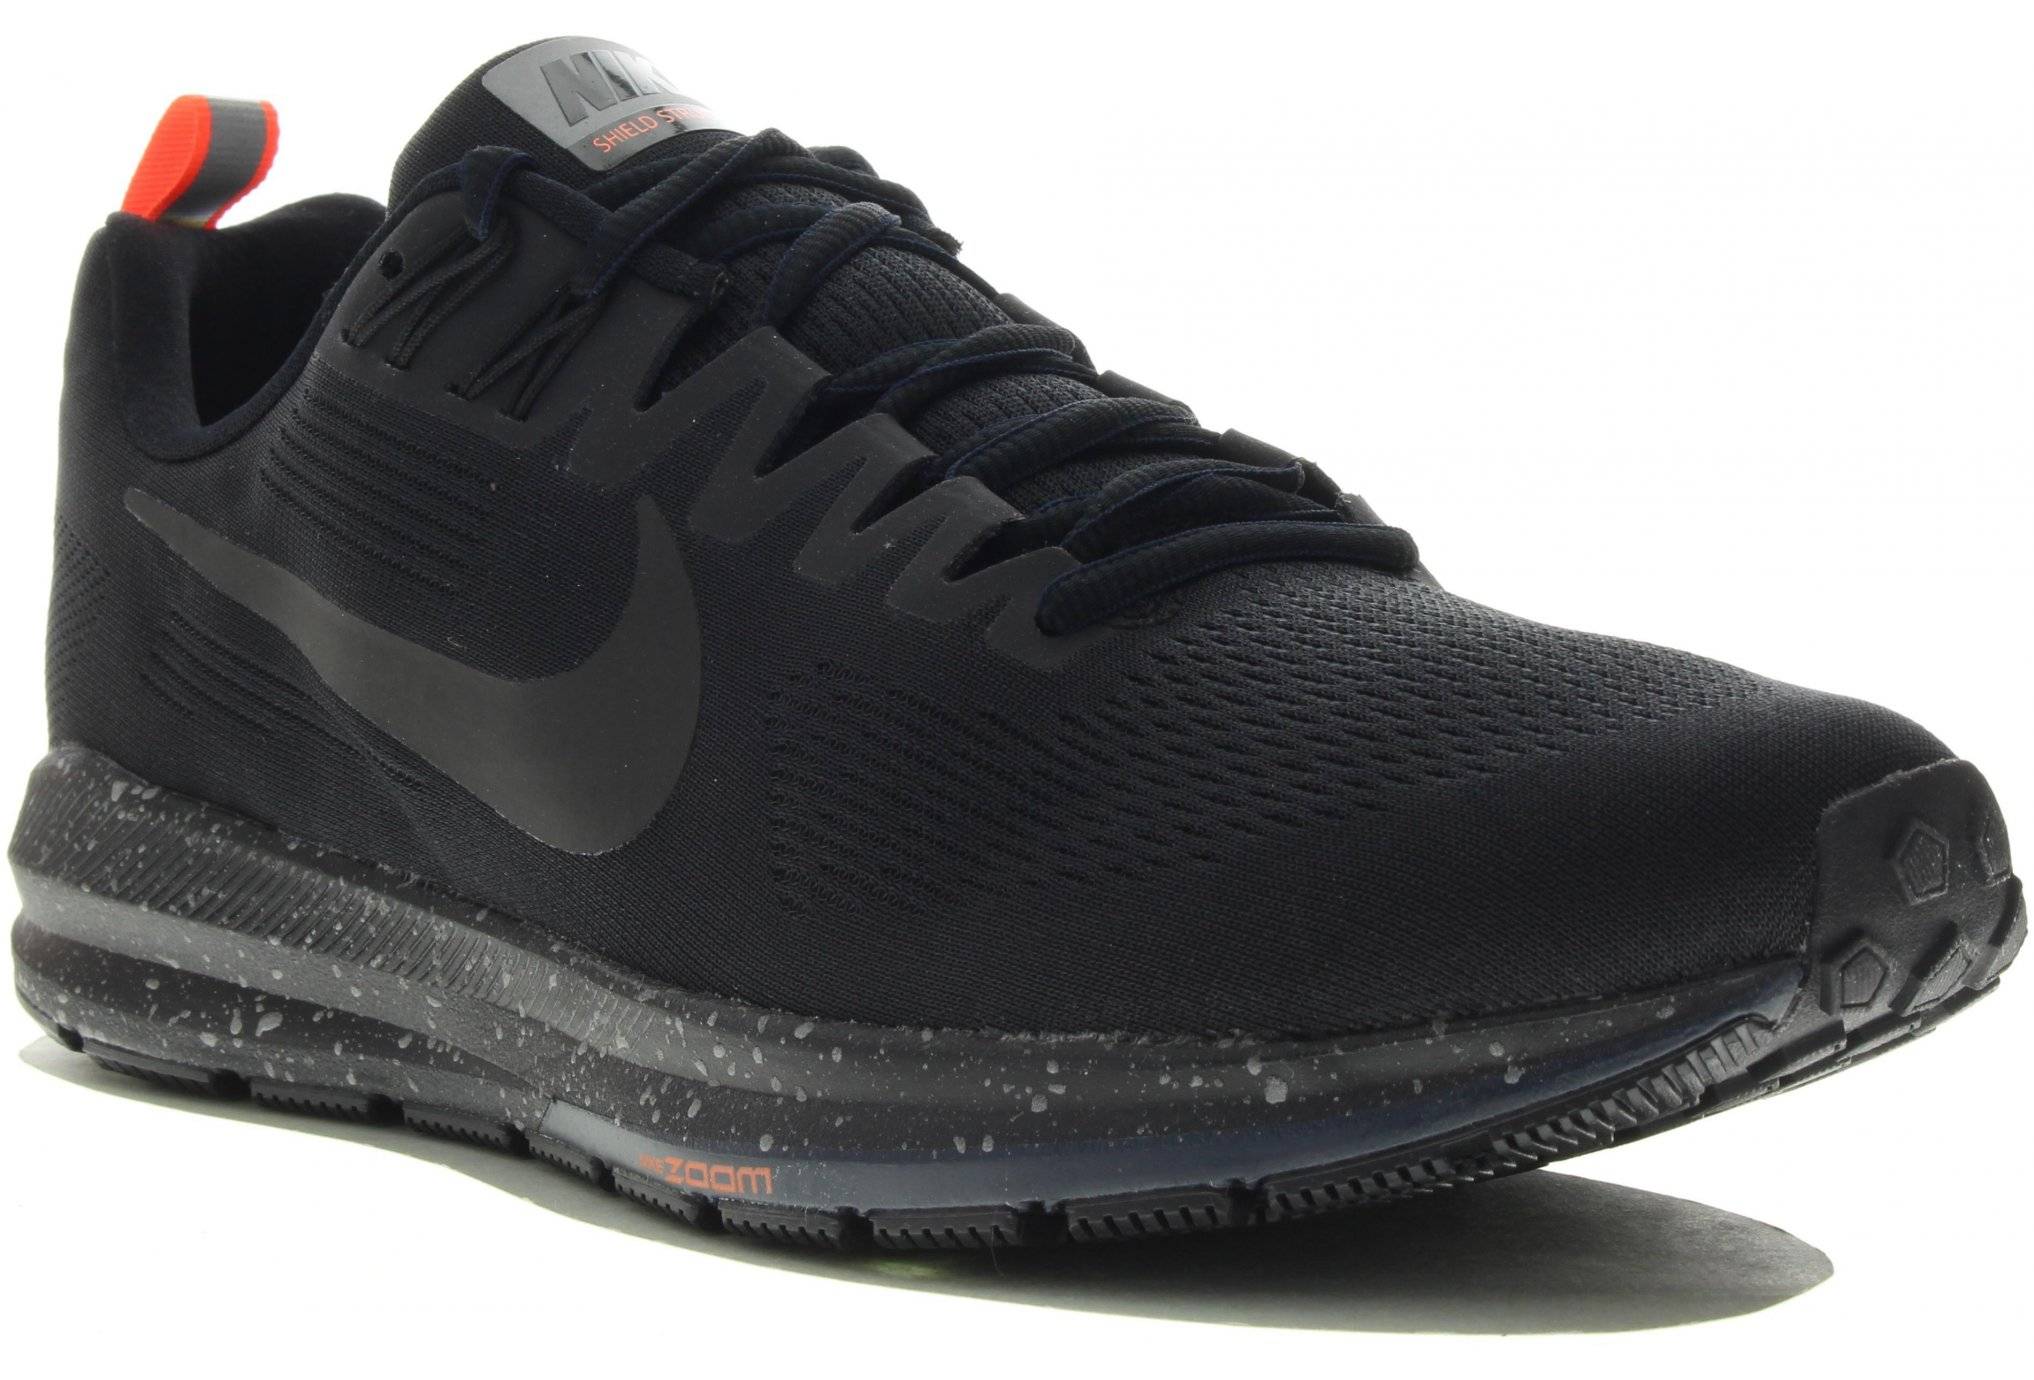 Nike Air Zoom Structure 21 Shield M 